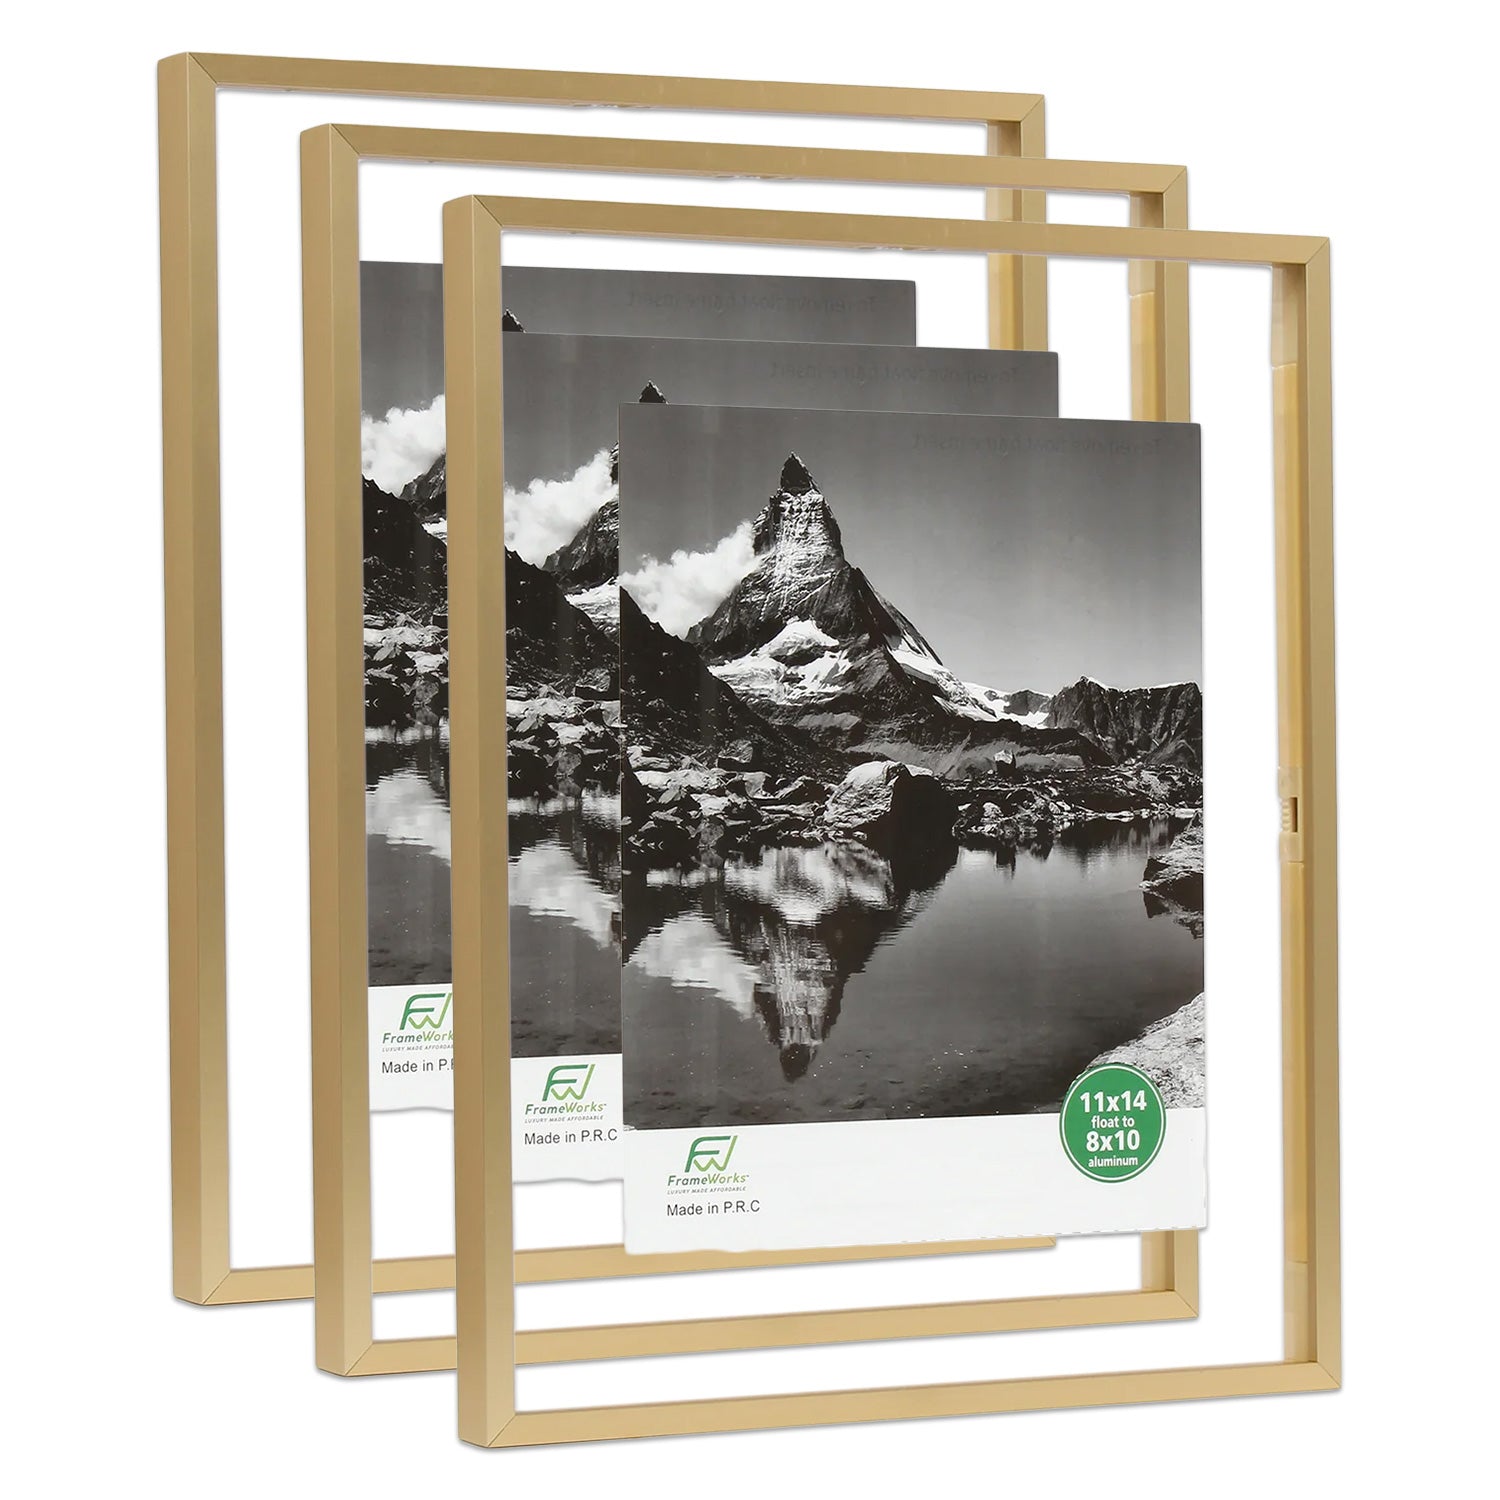  Fkvat 11x14 Picture Frame Champagne Gold Brushed Thin Metal  Set of 2 for Horizontal and Vertical Wall Hanging Aluminum Floating Photo  Frames Display 11 x 14 Frame with Mat for